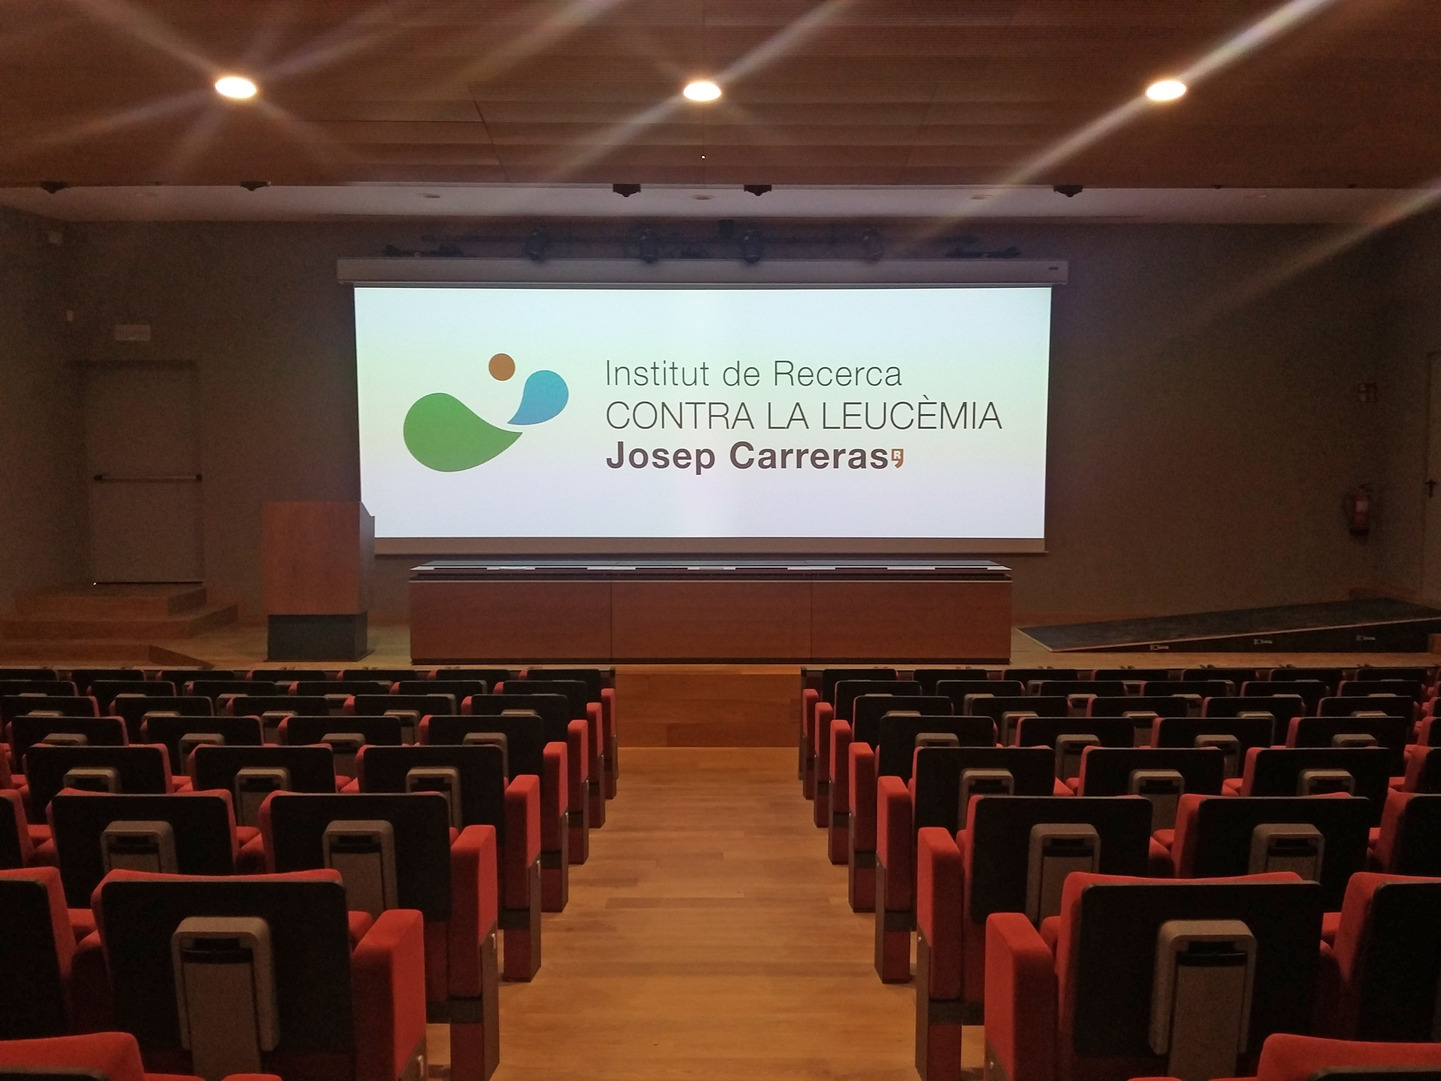 Charmex supplies the latest audiovisual technology to the Josep Carreras Leukemia Research Institute